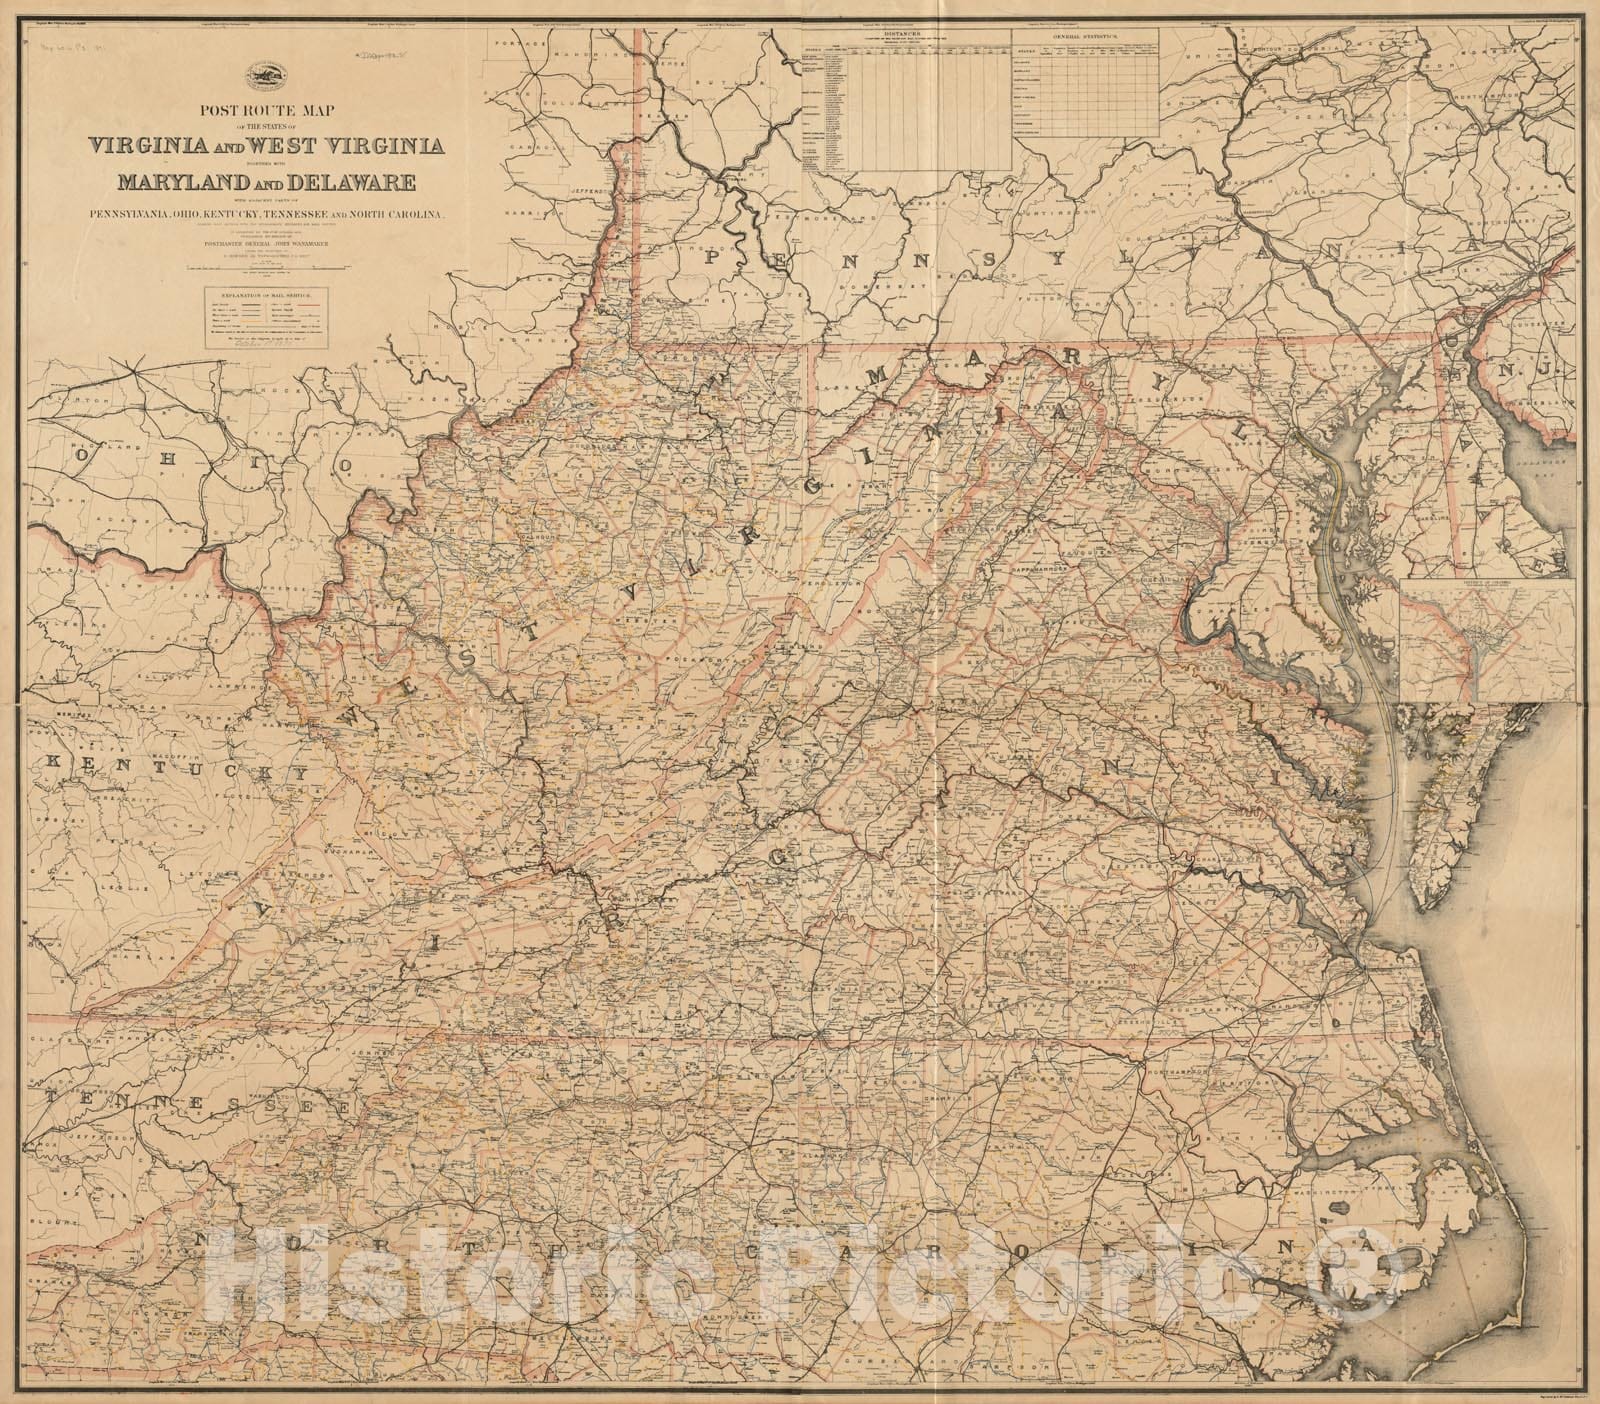 Historical Map, Post Route map of The States of Virginia and West Virginia Together with Maryland and Delaware with Adjacent Parts of Pennsylvania, Ohio, Kentucky, Vintage Wall Art